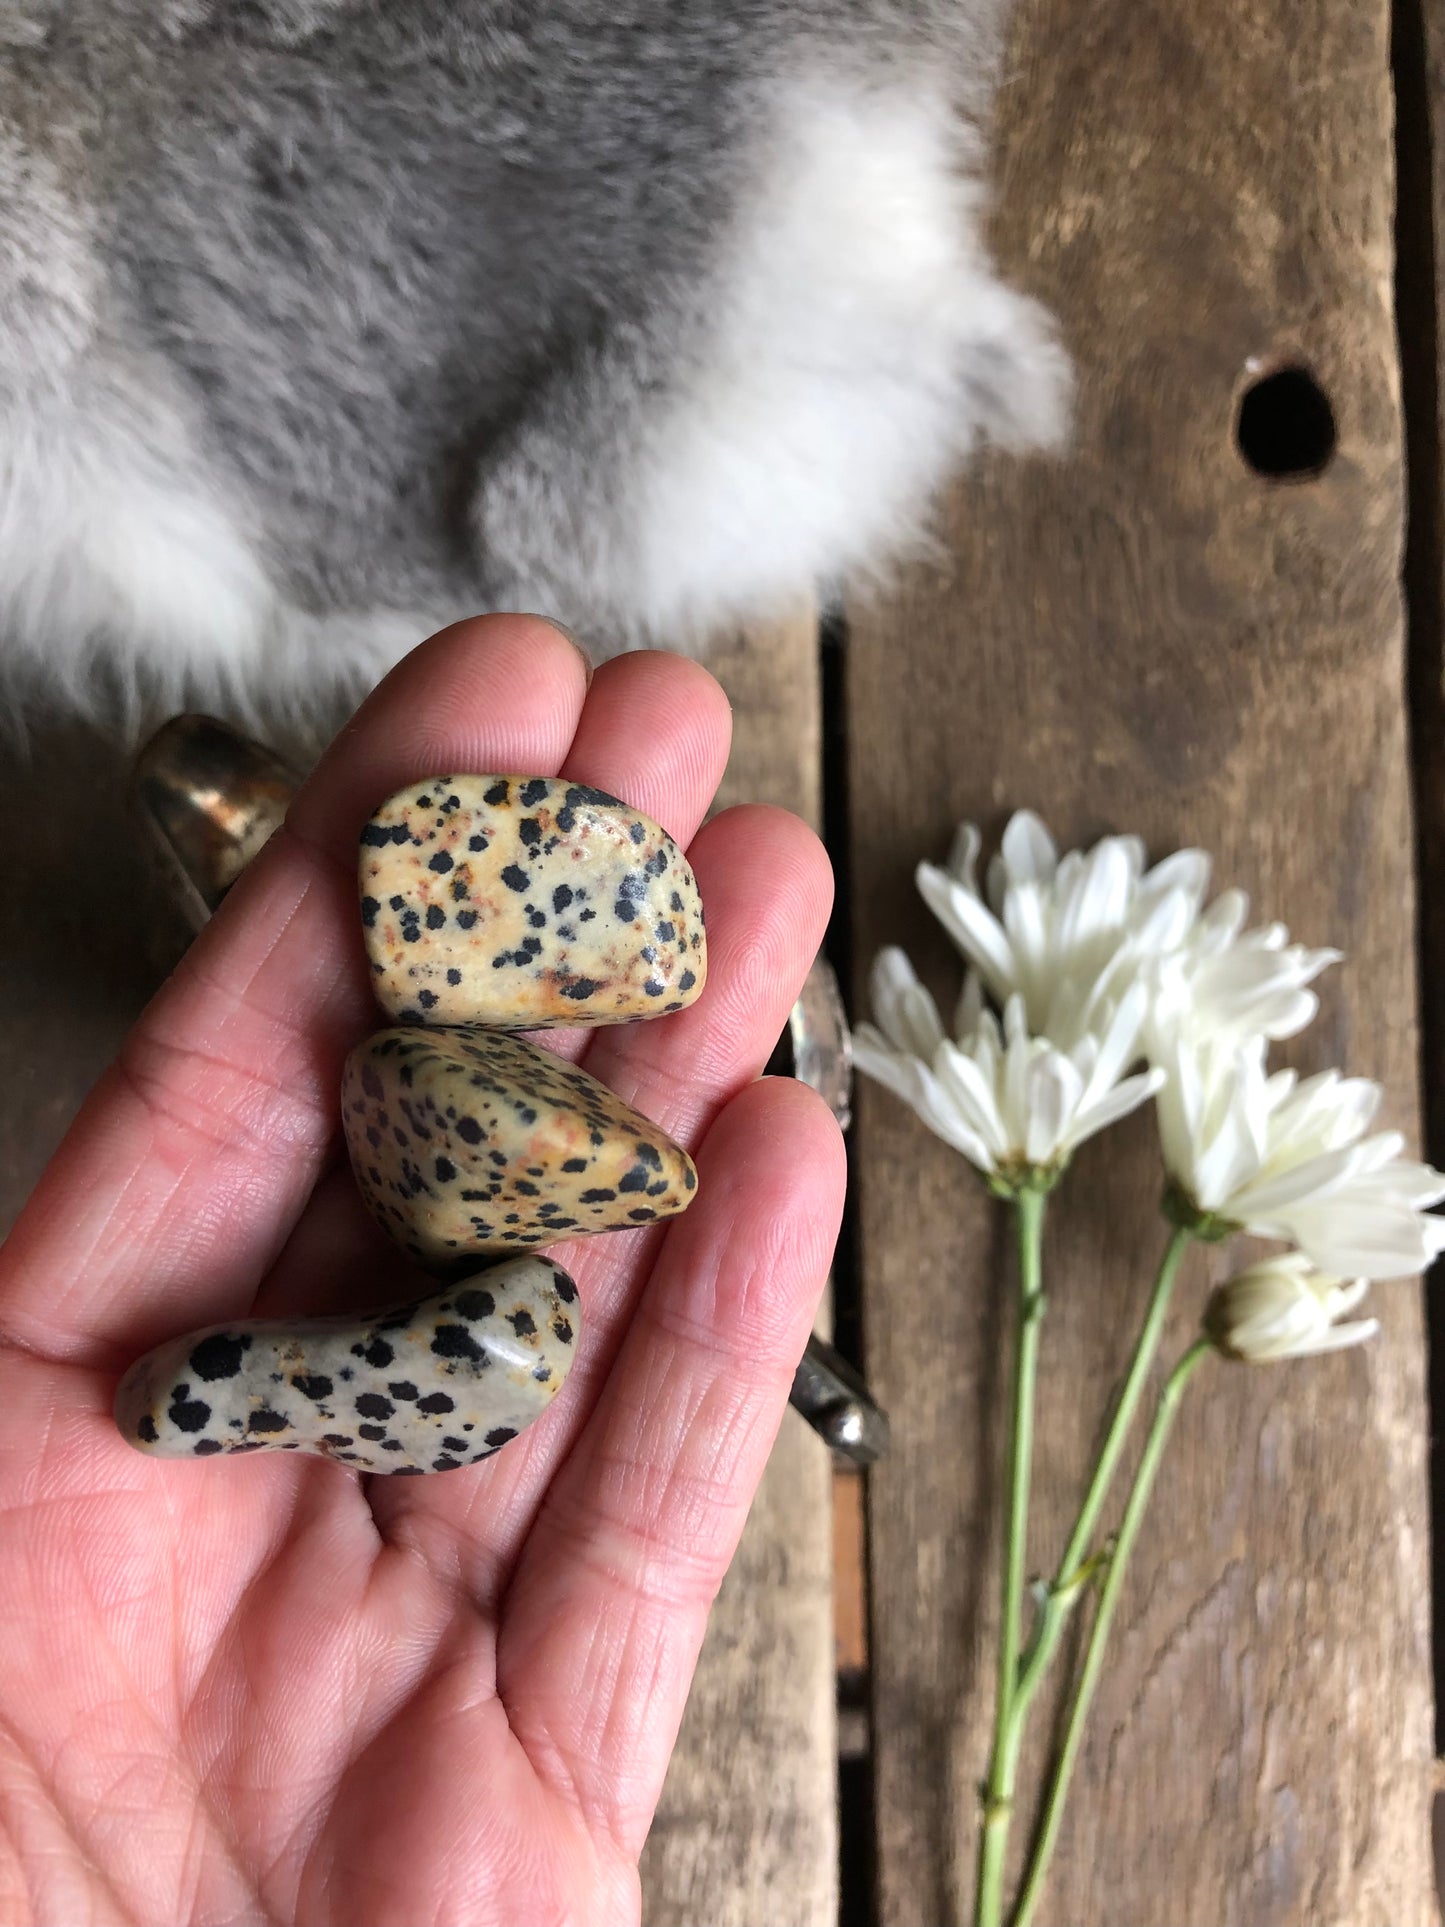 Dalmatian Jasper tumbled stones lay in hand over aged wood, grey fur and white flowers